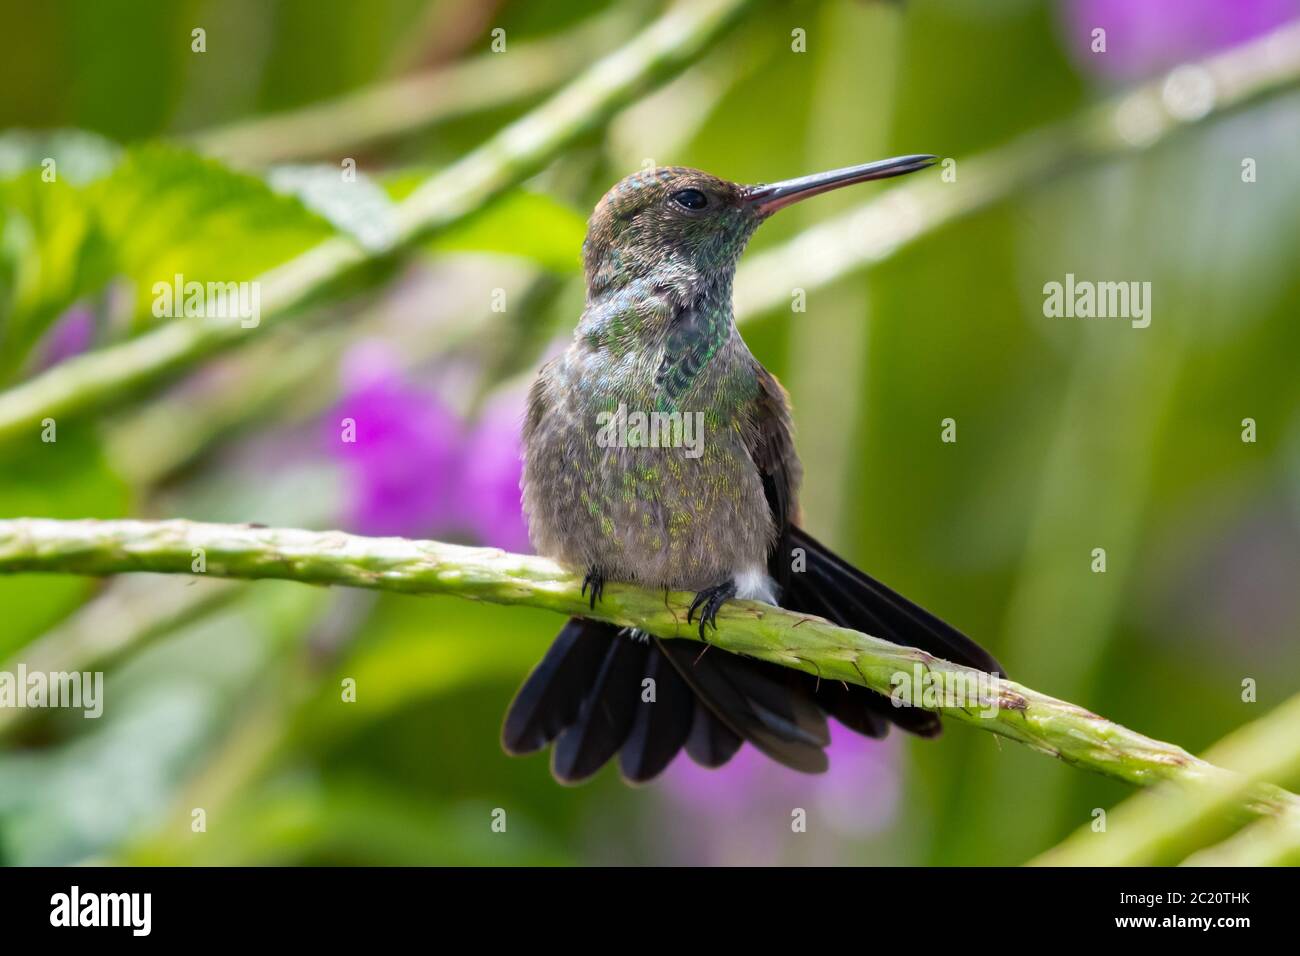 A juvenile Copper-rumped hummingbird stretching and looking to the side while perching in a Vervain patch in a tropical garden. Stock Photo